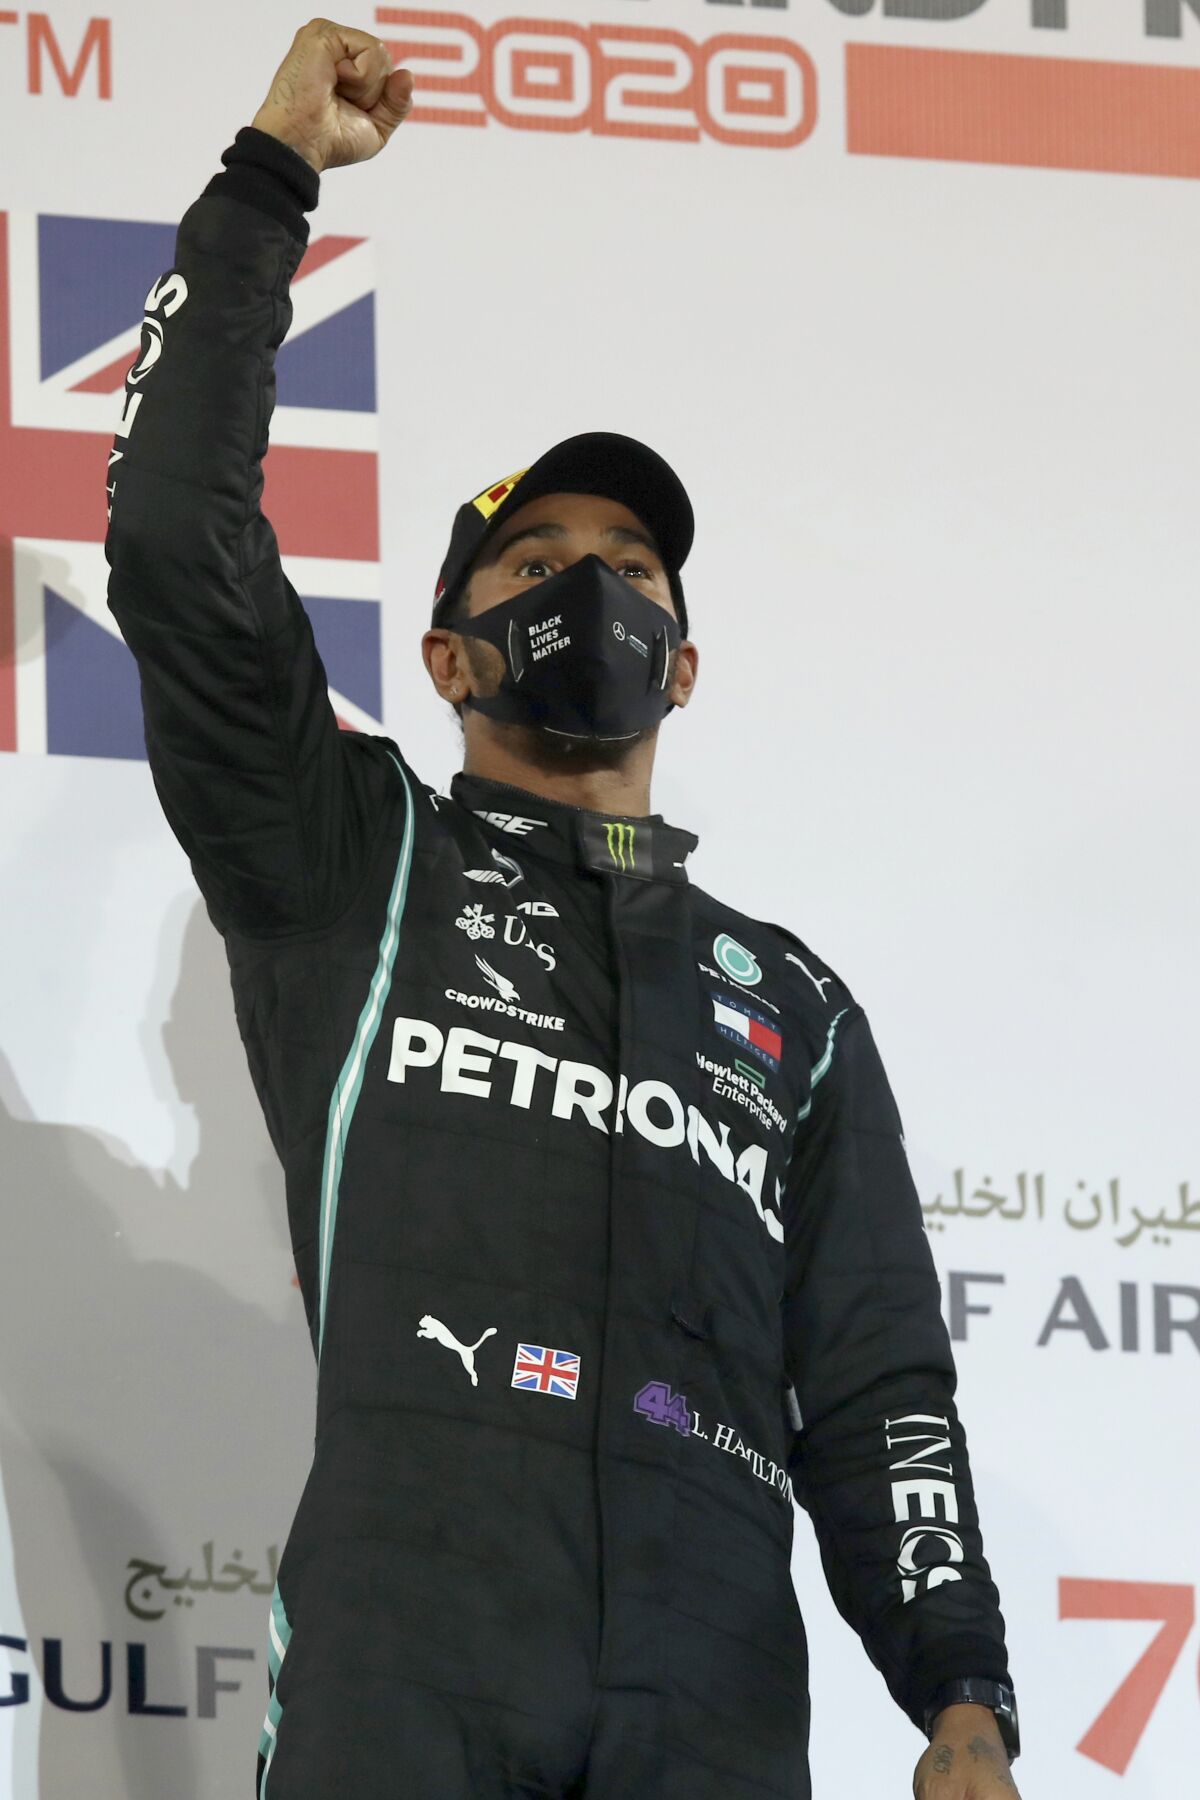 FILE - In this Sunday, Nov. 29, 2020 file photo Mercedes driver Lewis Hamilton of Britain celebrates after wining the Formula One race in Bahrain International Circuit in Sakhir, Bahrain. World champion Lewis Hamilton tested positive for COVID-19 and will miss the Sakhir Grand Prix this weekend, his Mercedes-AMG Petronas F1 Team said Tuesday Dec. 1, 2020. (Tolga Bozoglu, Pool via AP, File)